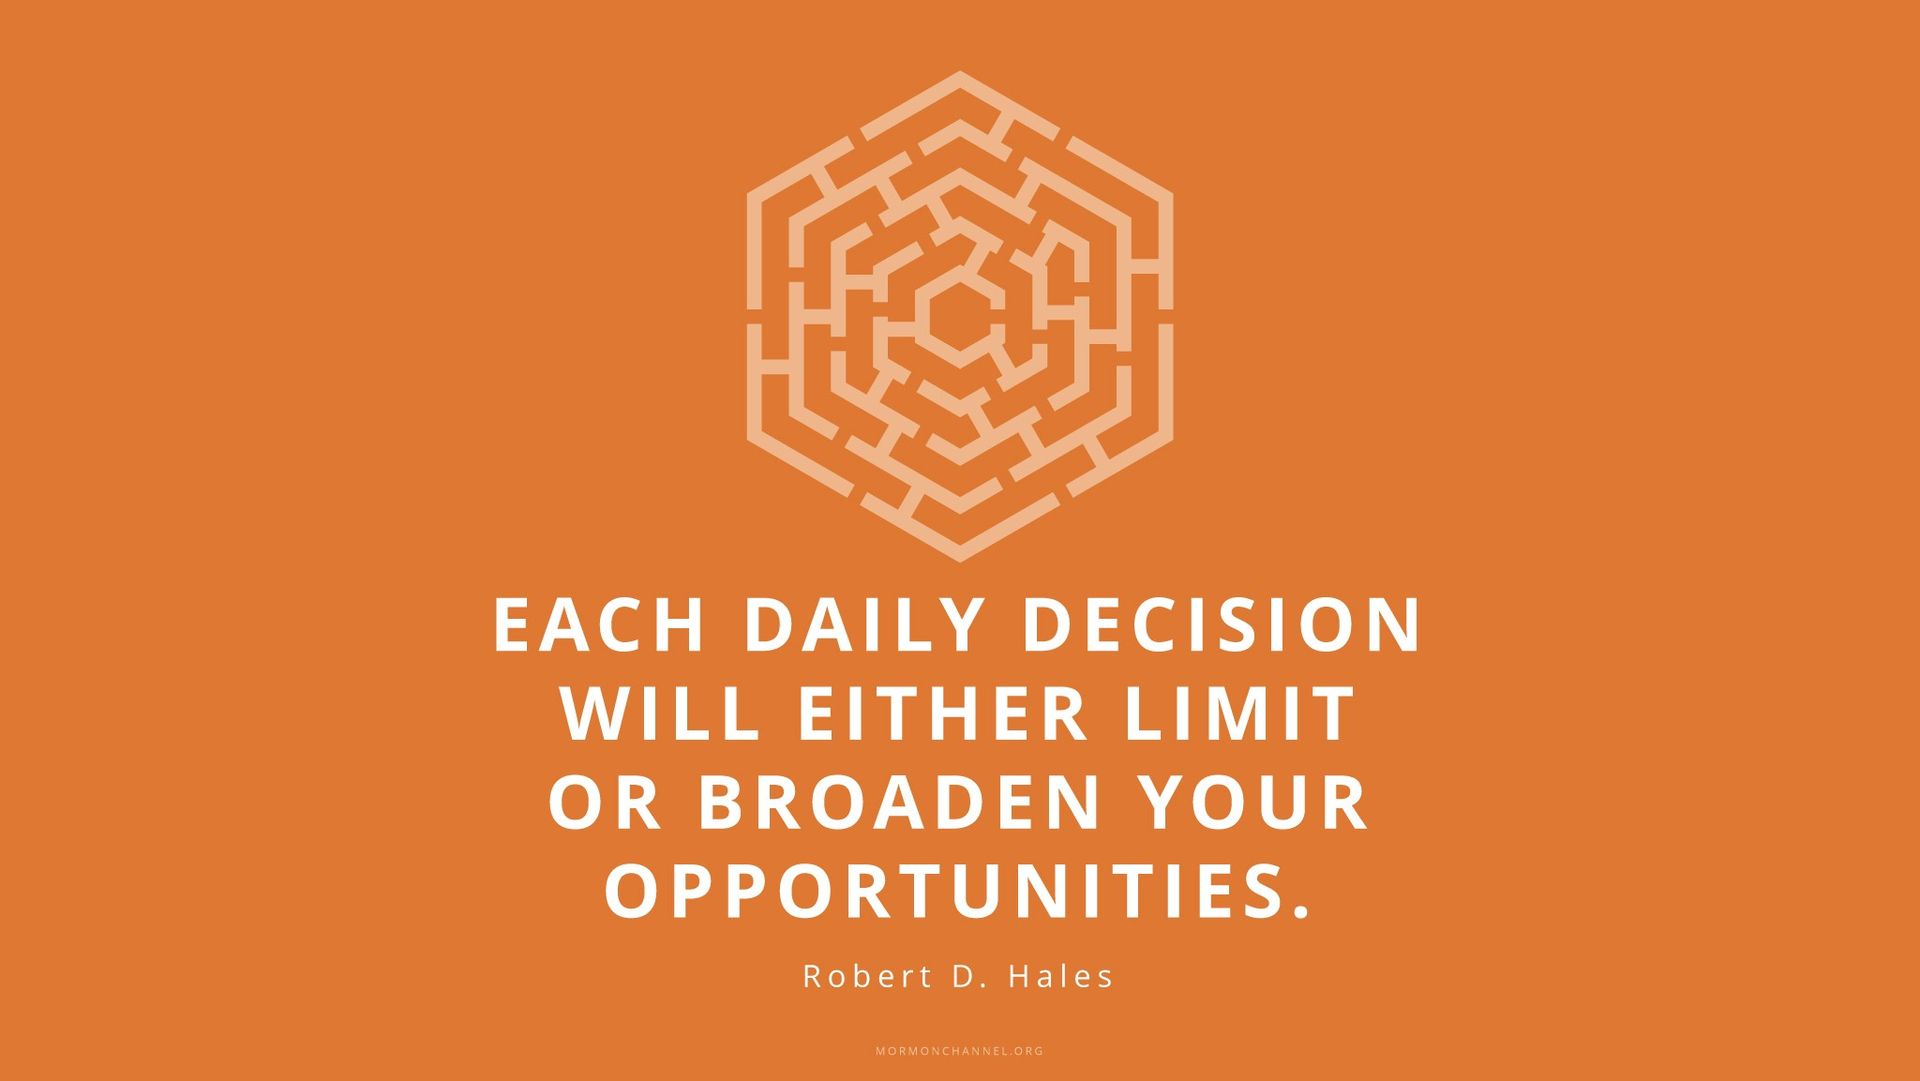 “Each daily decision will either limit or broaden your opportunities.”—Elder Robert D. Hales, “Fulfilling Our Duty to God”